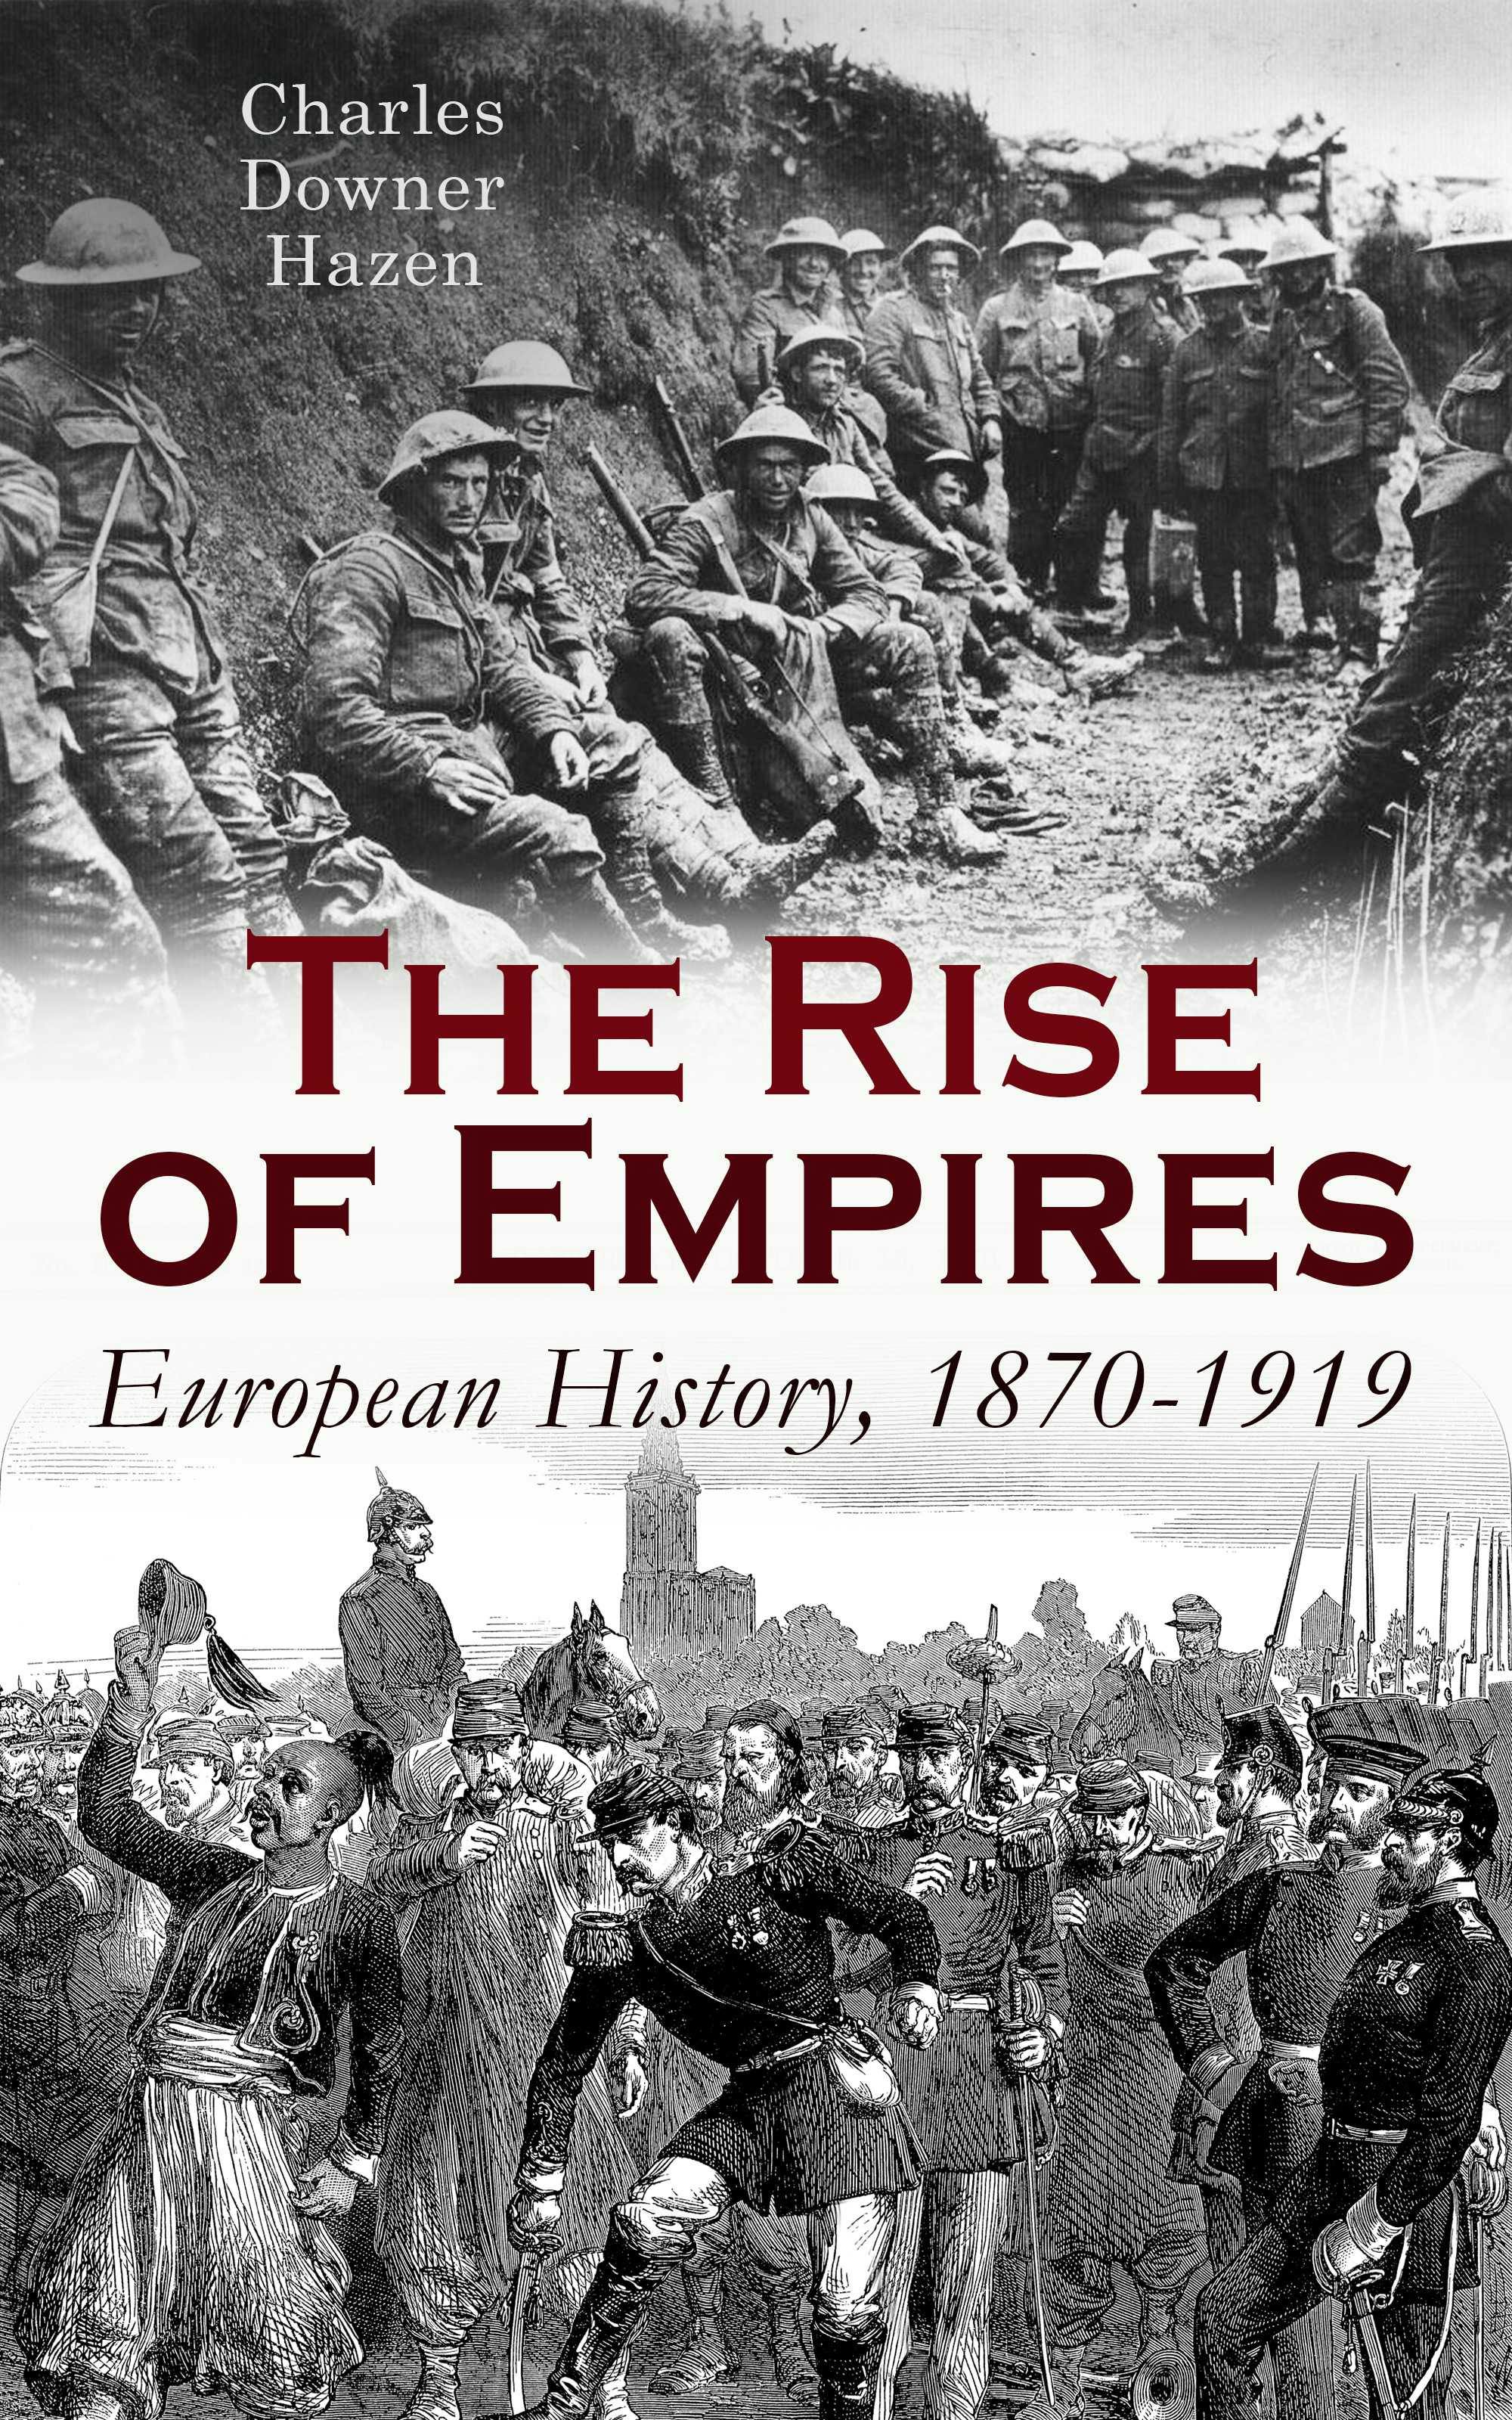 The Rise of Empires: European History, 1870-1919: Fifty Years of Europe from the Franco-Prussian War Until the Paris Peace Conference - Charles Downer Hazen